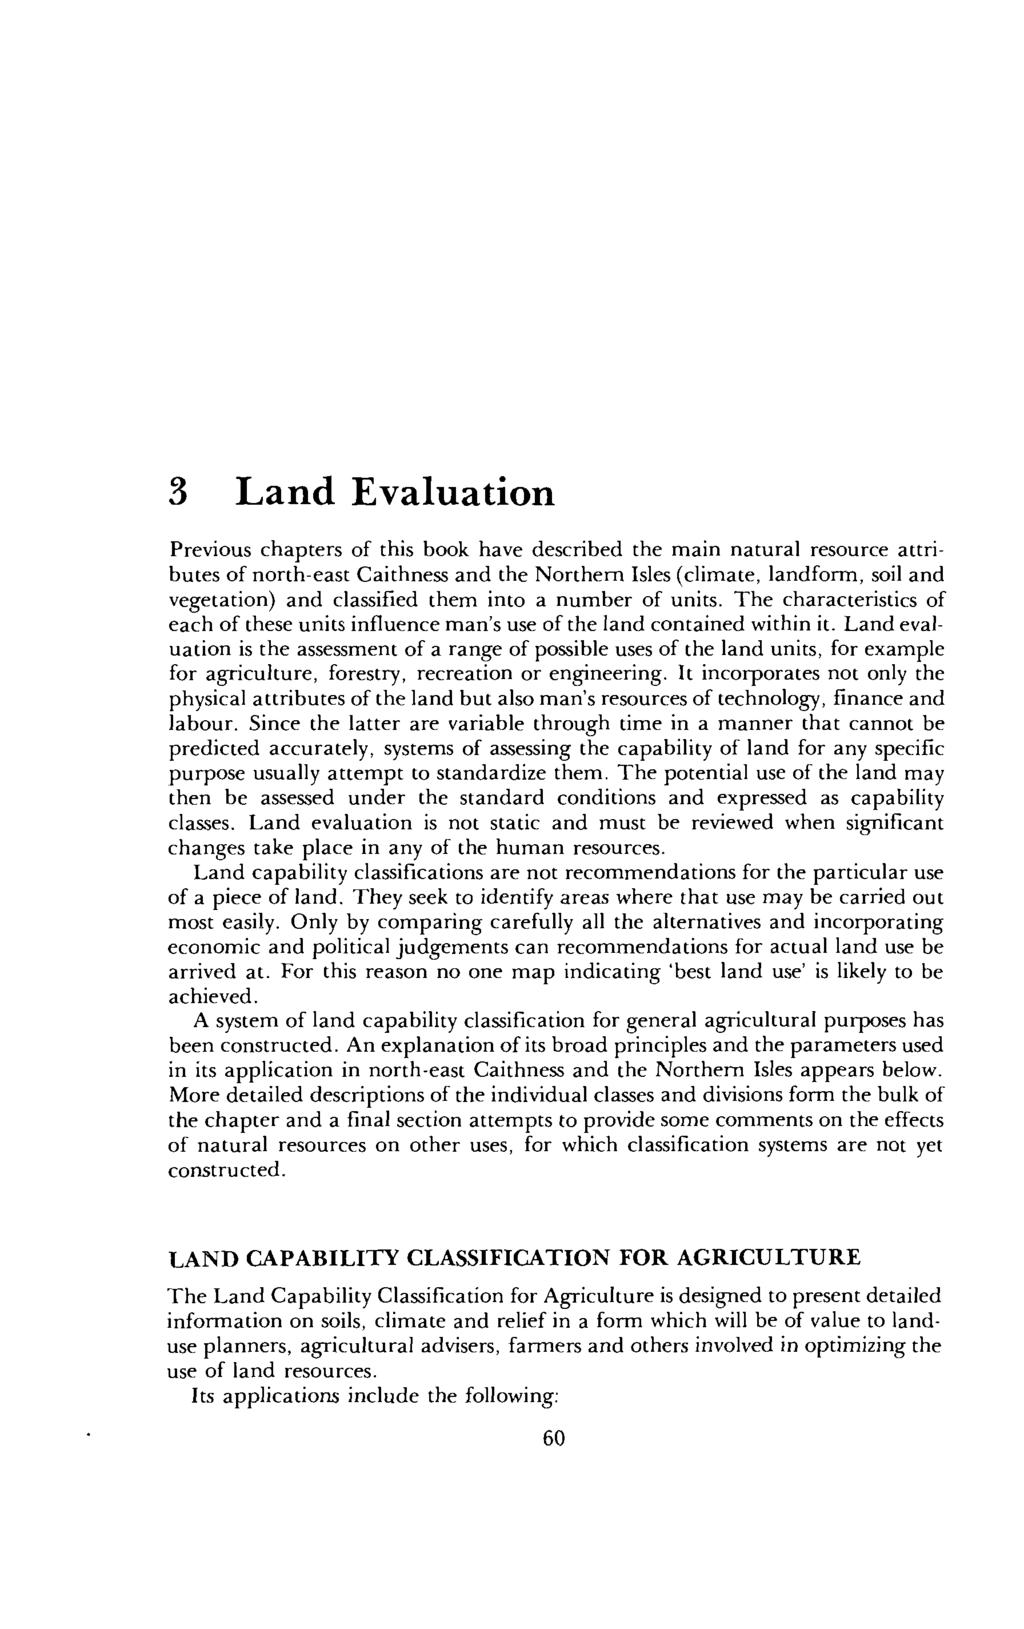 3 Land Evaluation Previous chapters of this book have described the main natural resource attributes of north-east Caithness and the Northern Isles (climate, landform, soil and vegetation) and